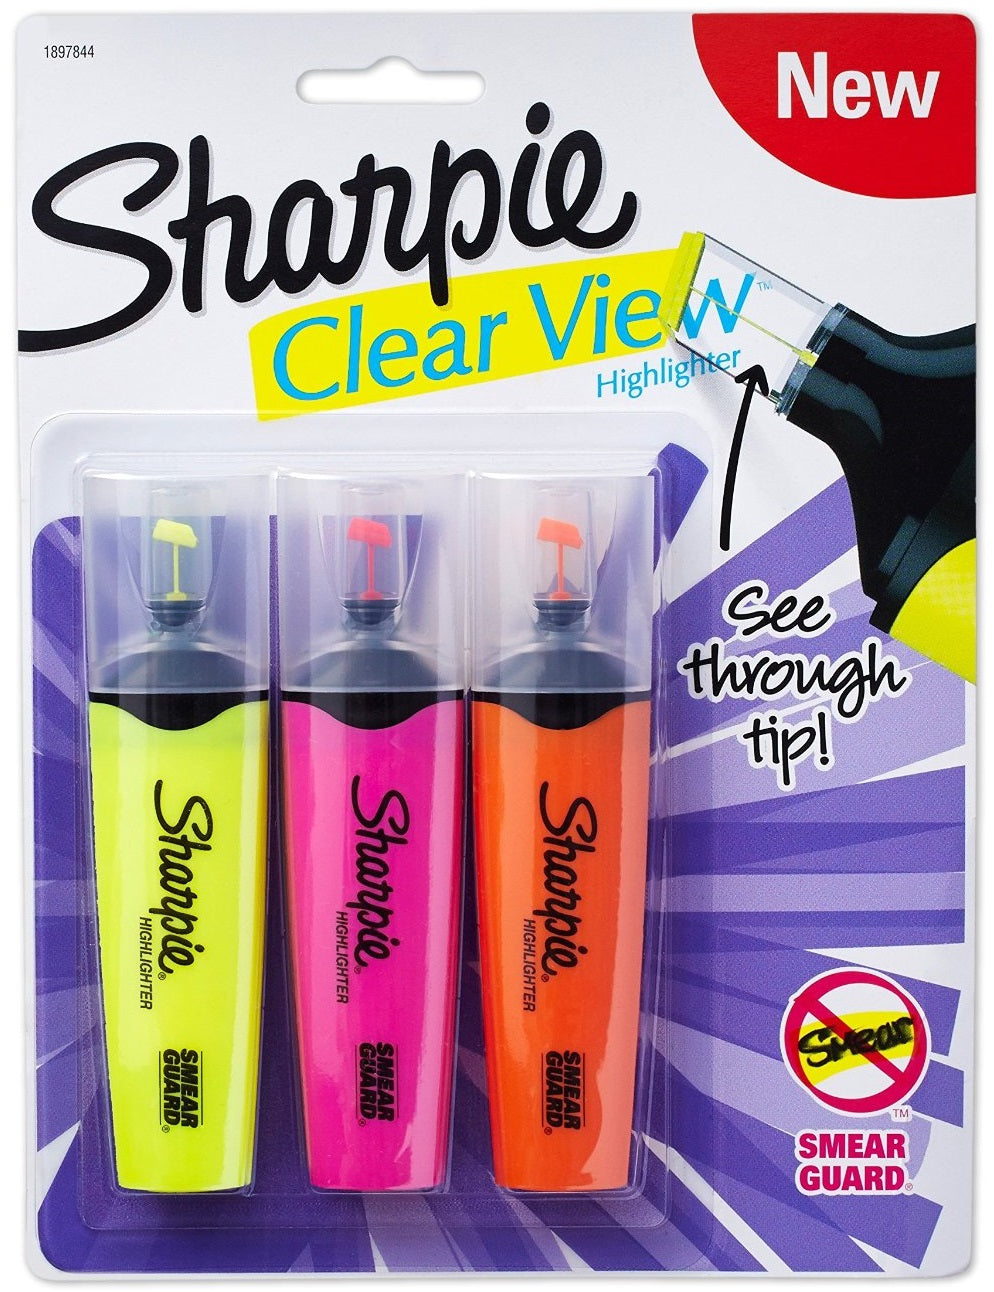 Sharpie 1897844 Clear View Highlighter, Assorted Colors, 3/Pack